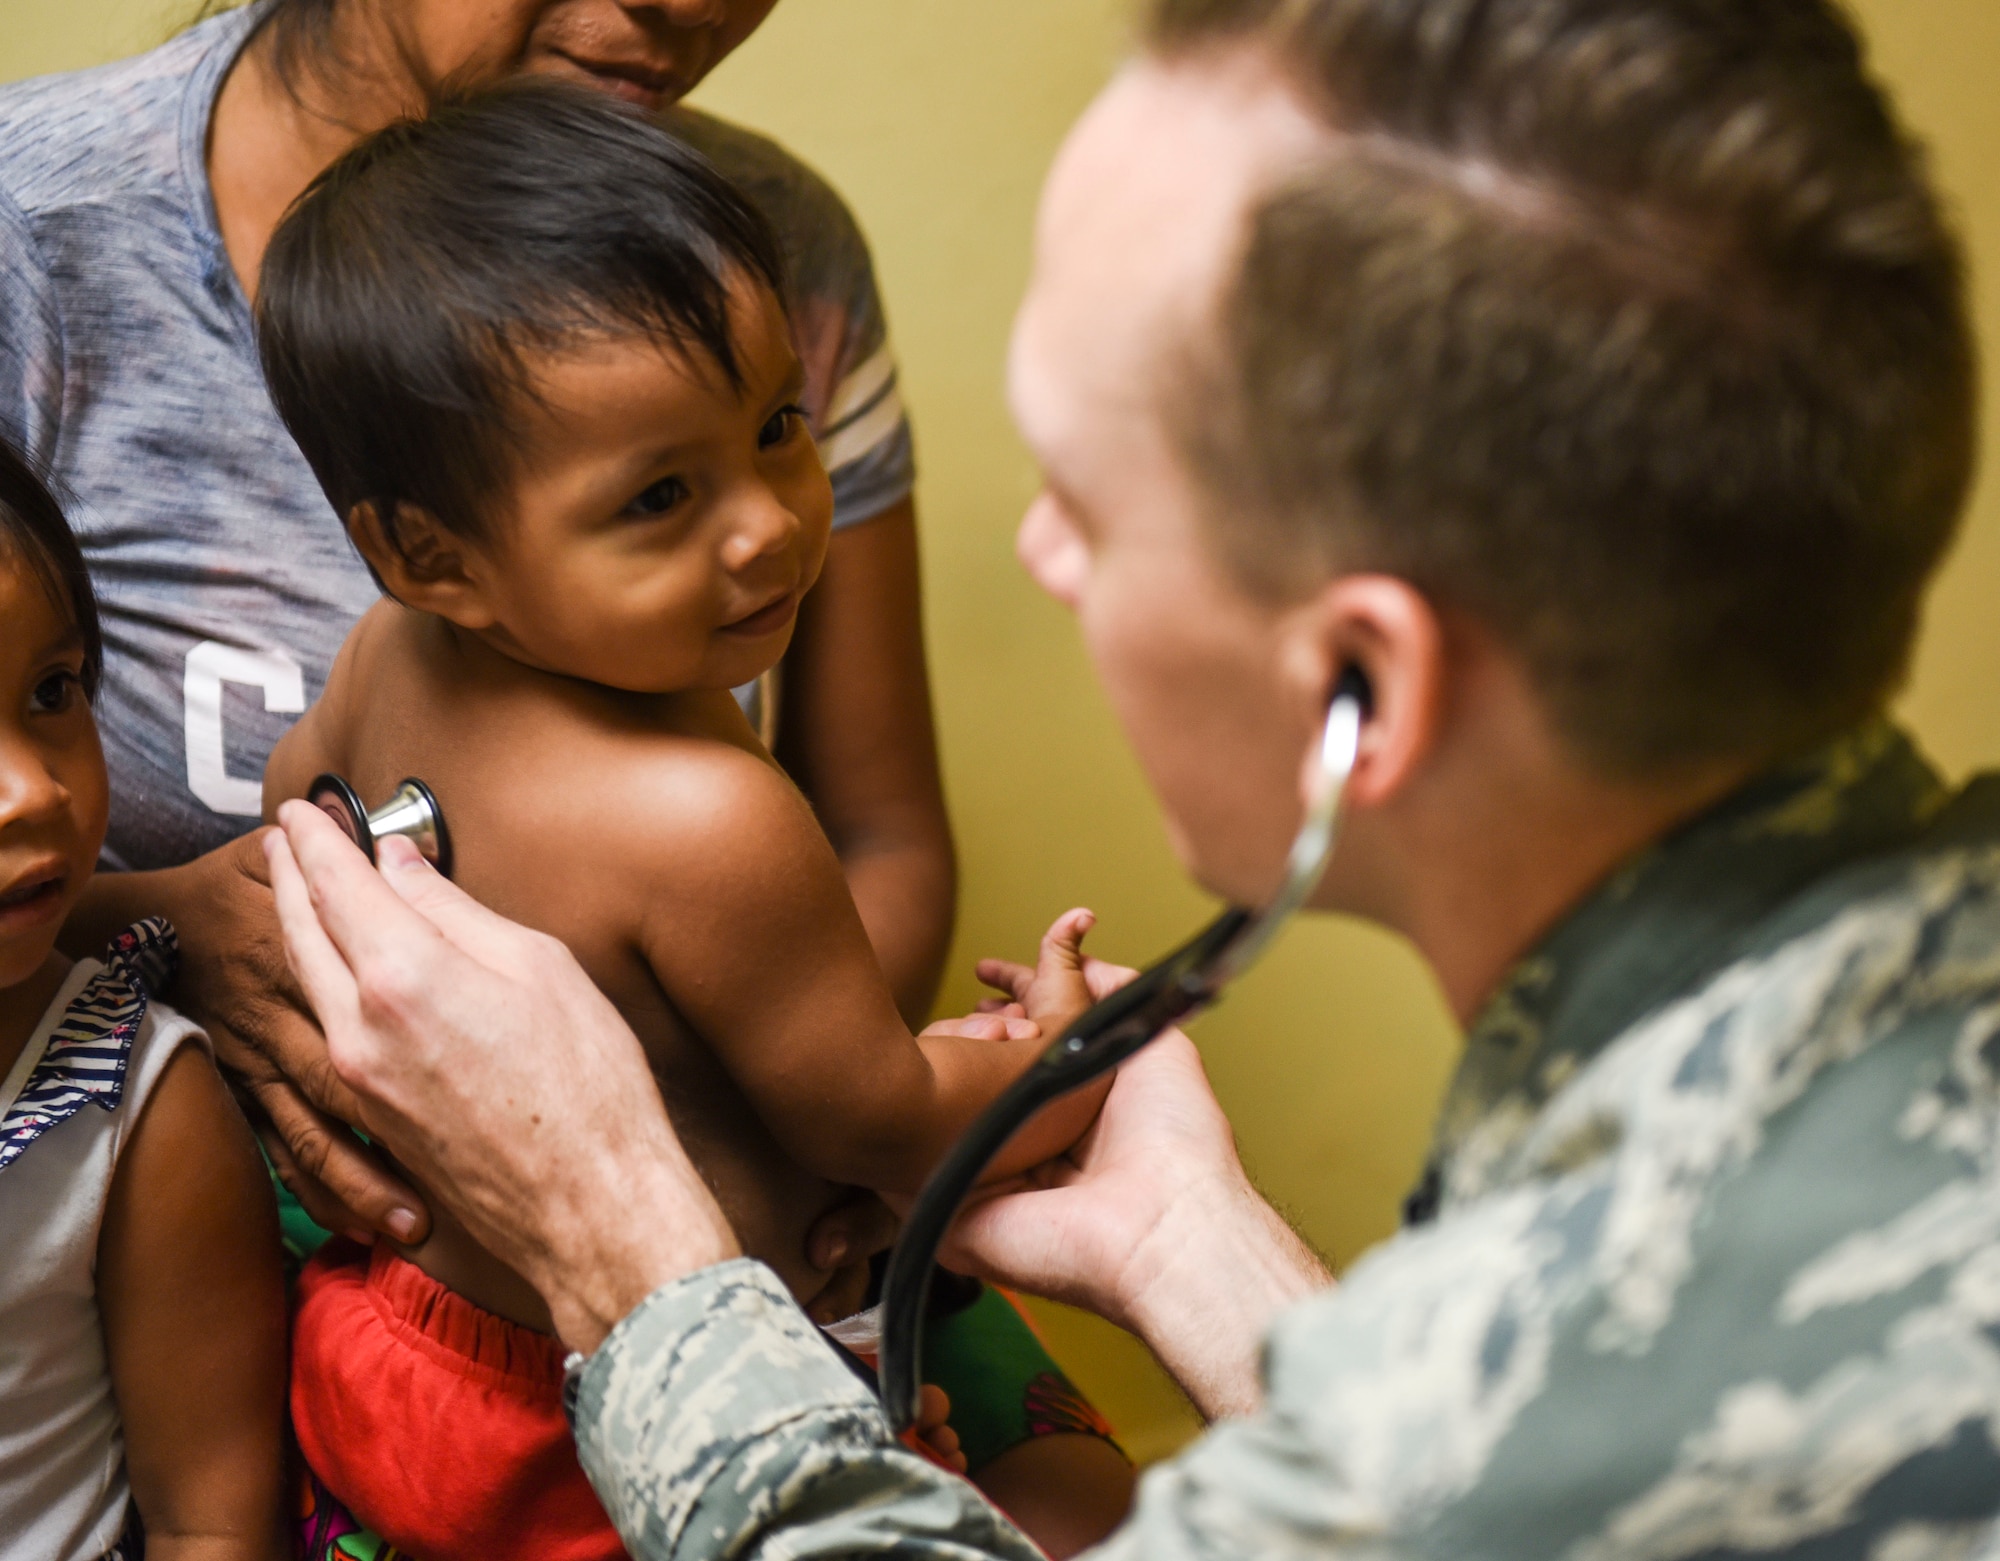 U.S. Air Force Capt. Charles Hutchings, 346th Expeditionary Medical Operations Squadron pediatrician, checks the heartbeat of a child in Meteti, Panama, April 17, 2018. Hutchings participated in Exercise New Horizons 2018, which assisted communities in Panama by providing medical assistance and building facilities such as schools, a youth community center and a women’s health ward. (U.S. Air Force photo by Senior Airman Dustin Mullen)